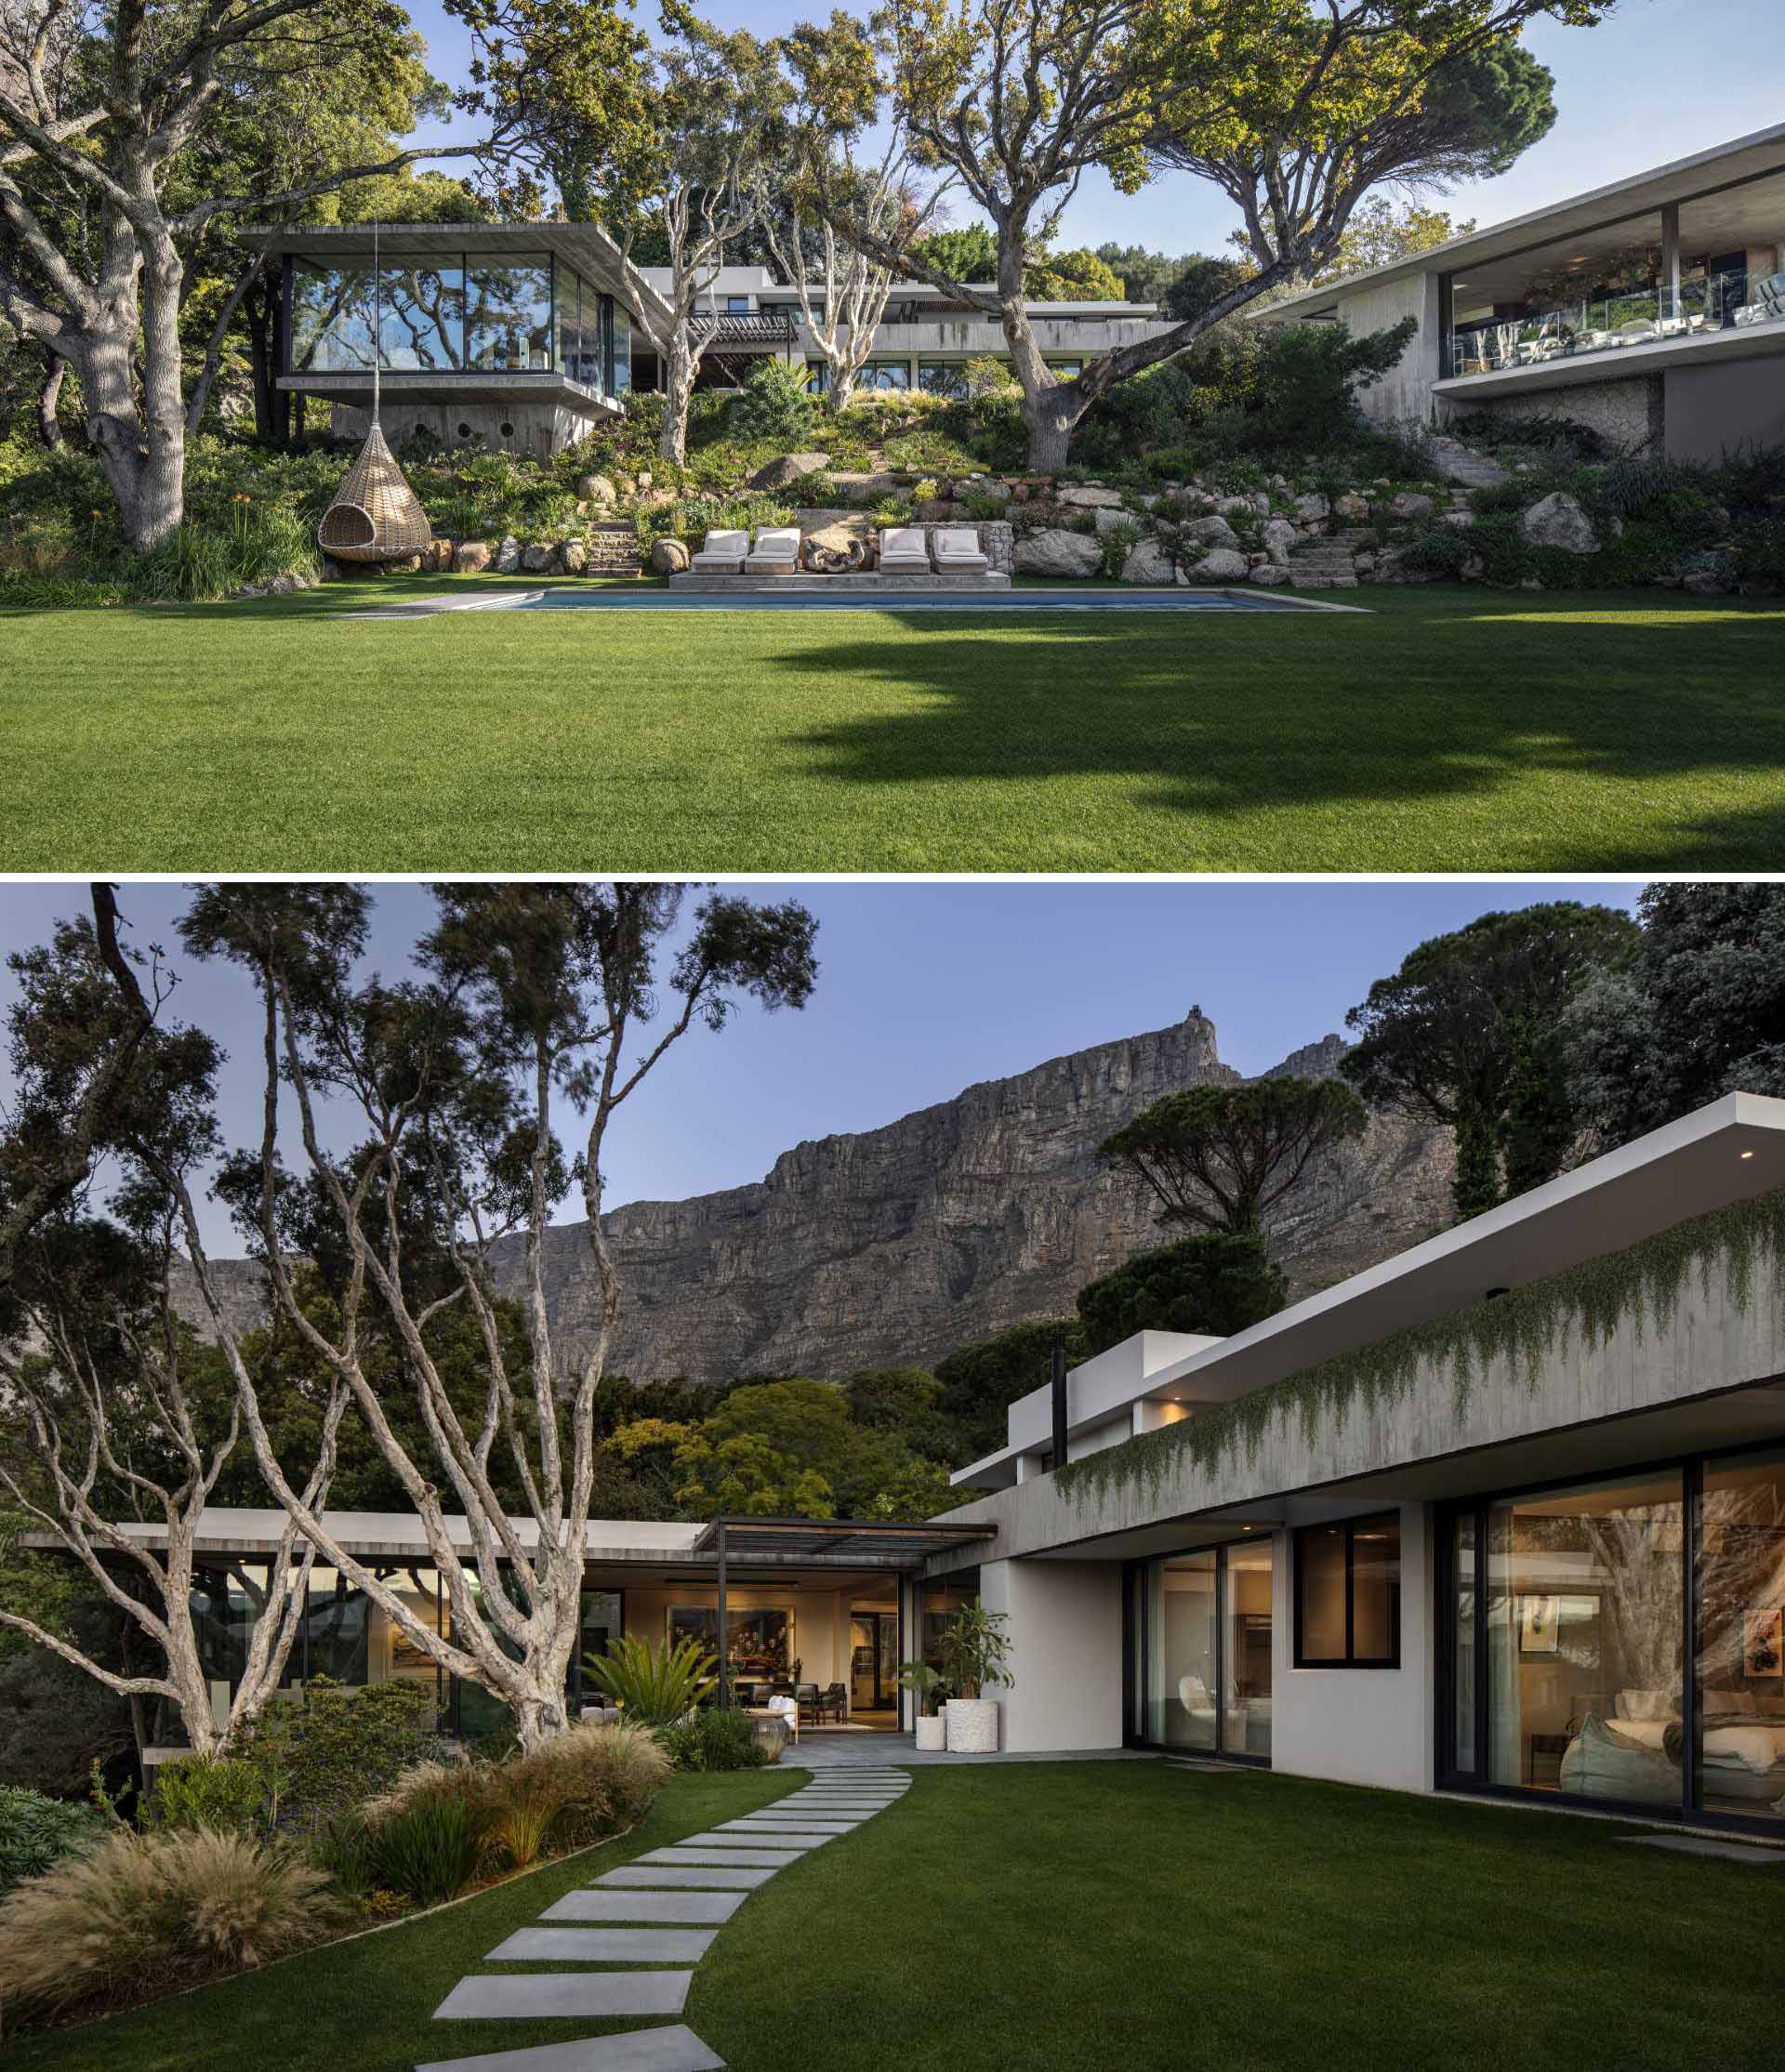 A modern house in Cape Town, South Africa, that includes a rock garden and swimming pool.